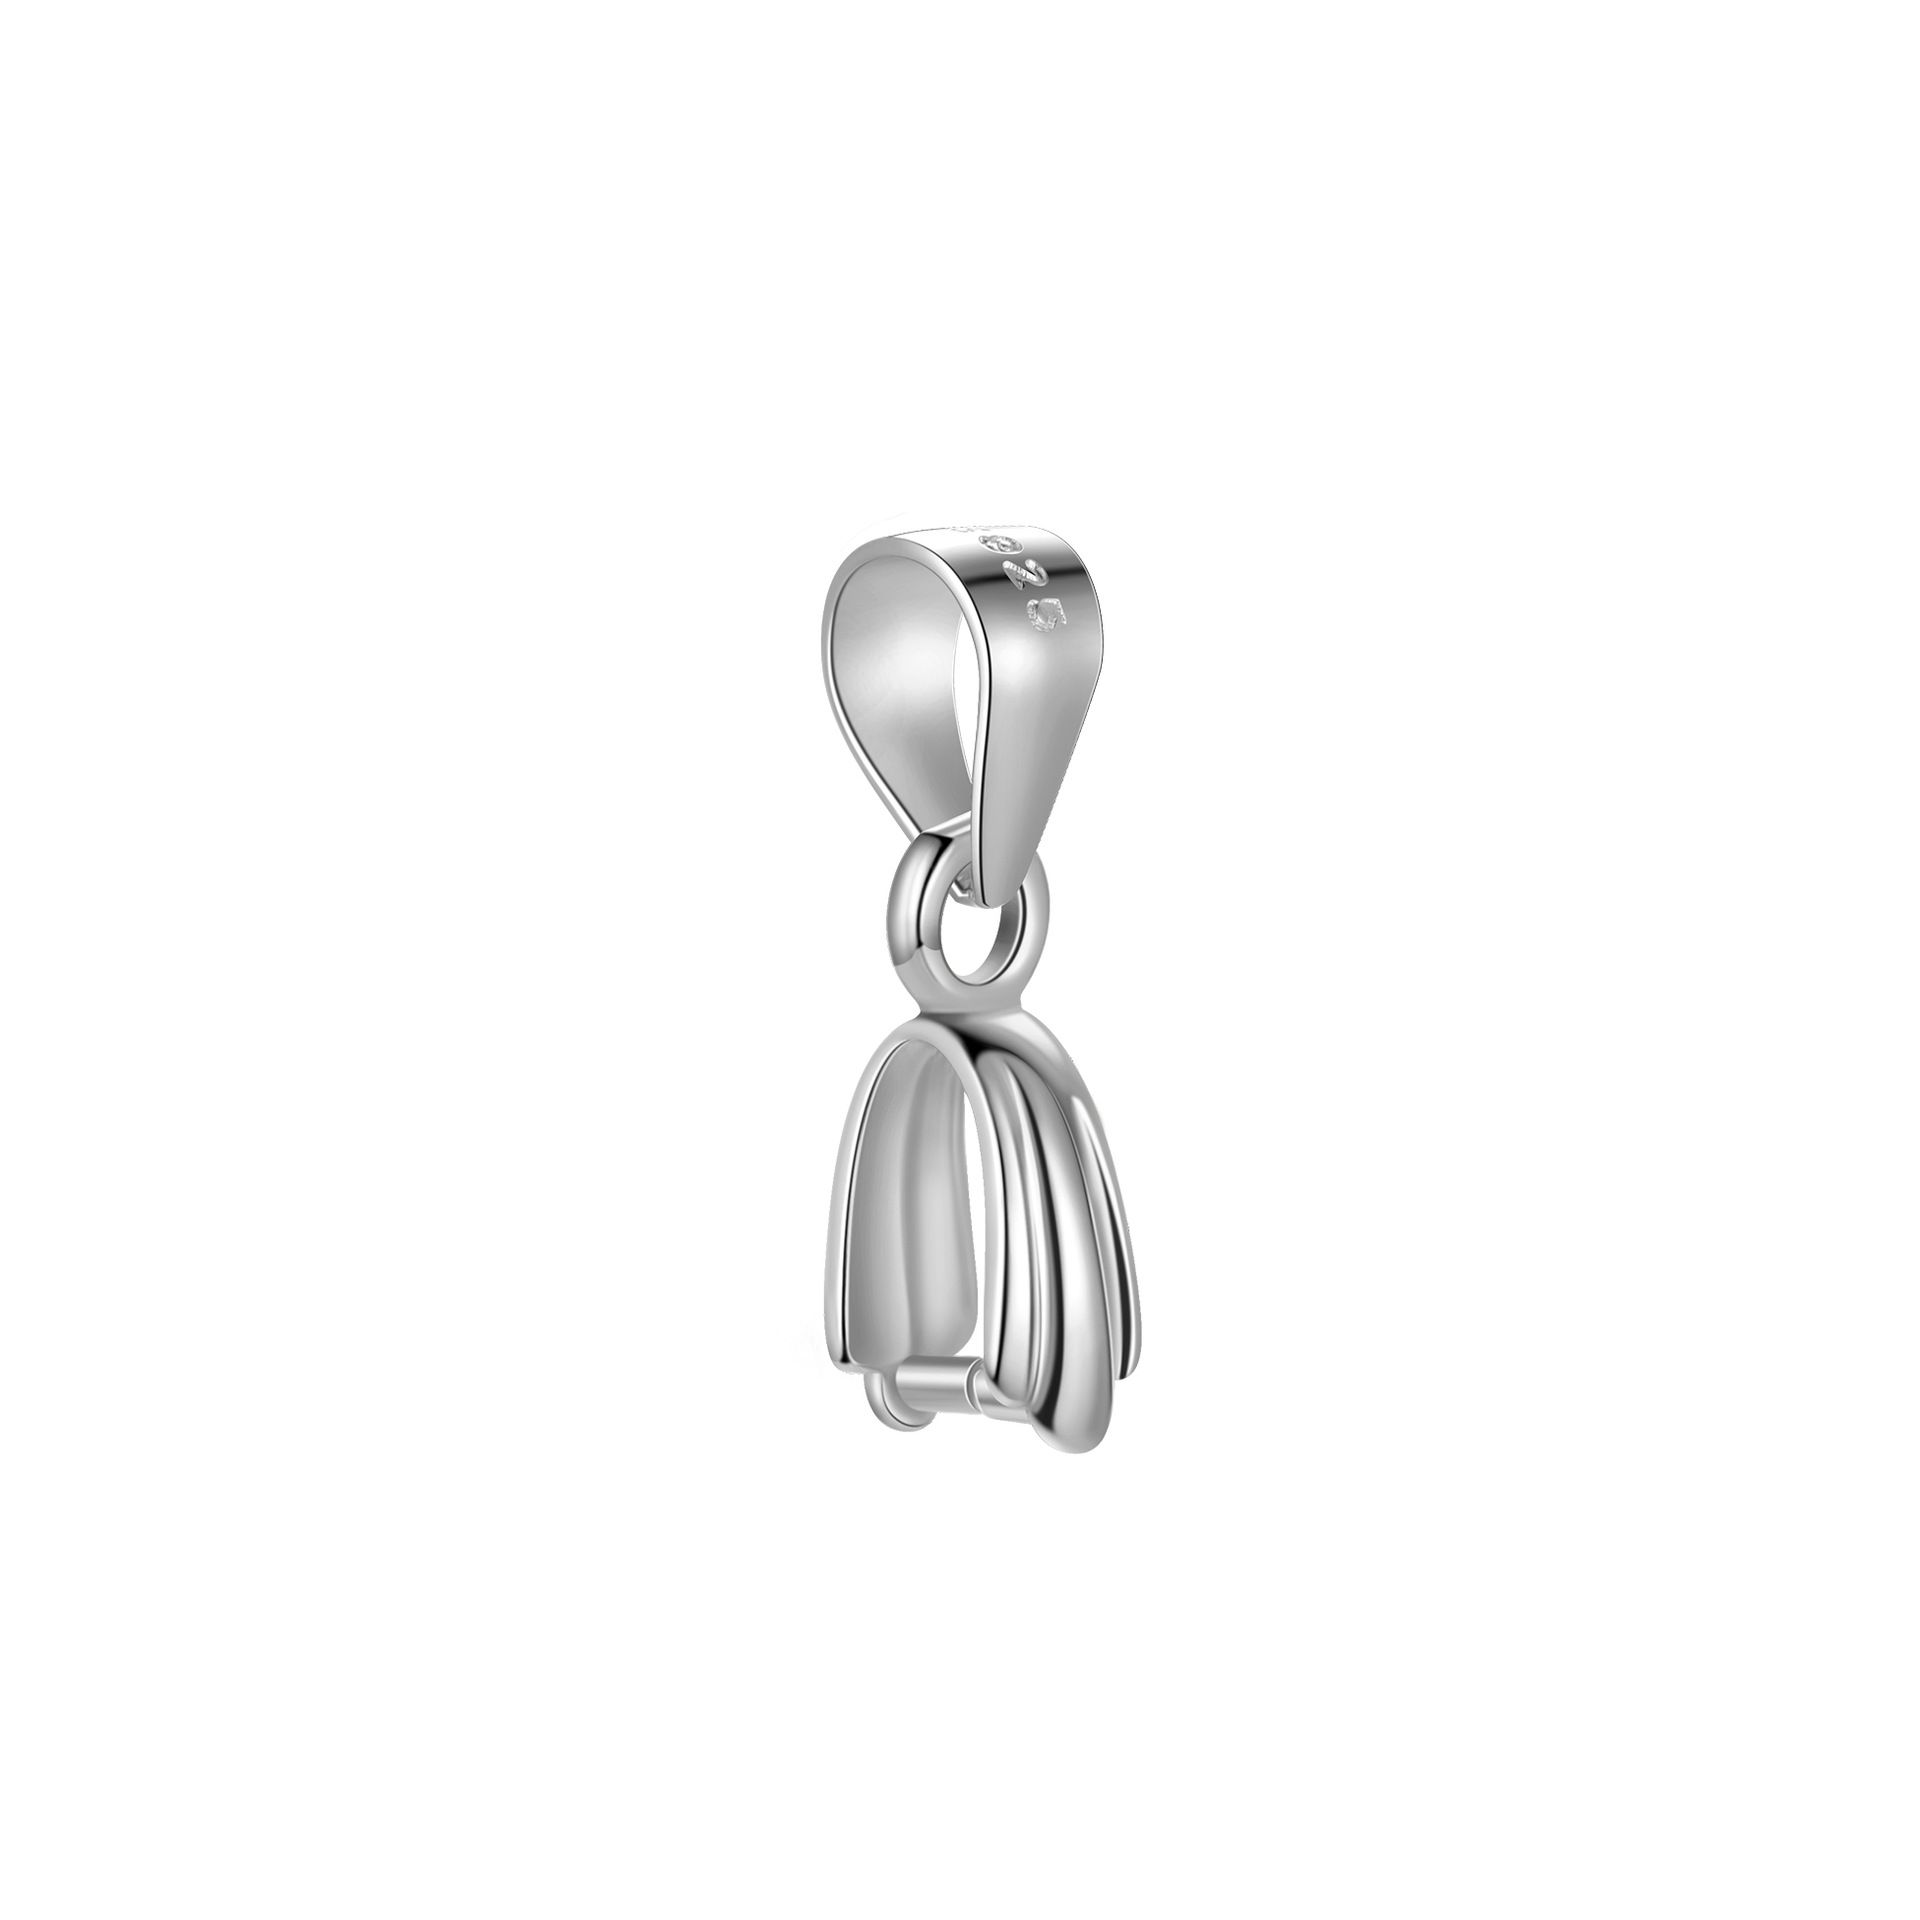 Solid 925 Sterling Silver Bail Pendant Clasp Connector, Pinch Bail